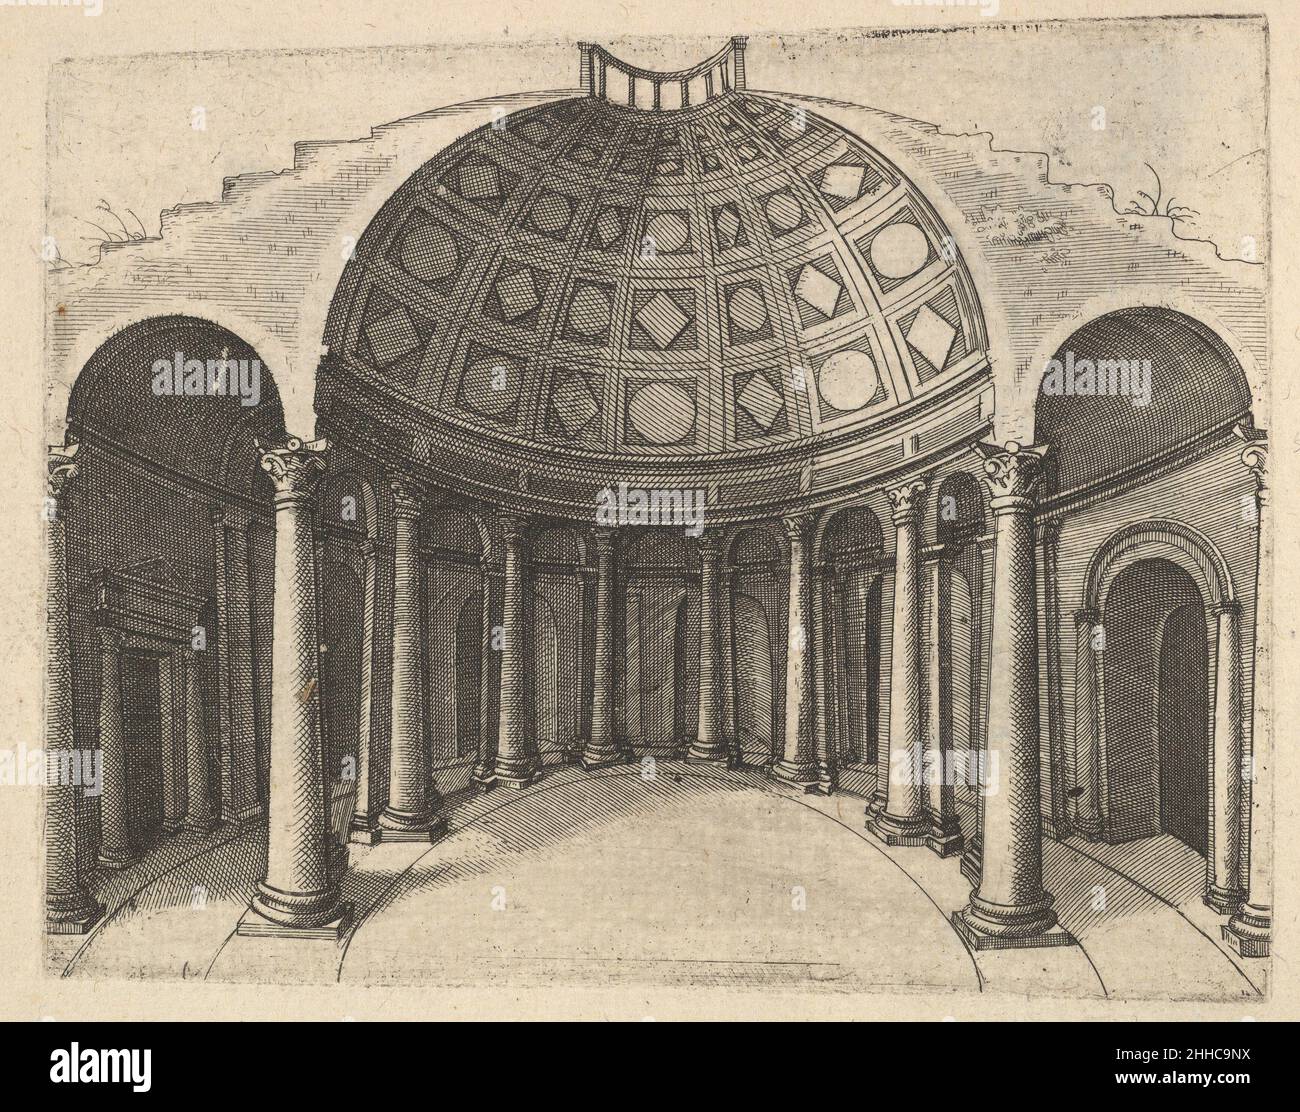 Cross-Section of Round Temple [Pinaculu Termar], from the series 'Ruinarum variarum fabricarum delineationes pictoribus caeterisque id genus artificibus multum utiles' 1554 Lambert Suavius Netherlandish Perspectival cross section of a building, said to be the so-called ‘Pinaculu Termar’. The building has a circular floor plan and consists of a central round nave surrounded by an ambulatory. The coffered ceiling is interrupted at top by an oculus. While it has been suggested that the building may represent the Church of Santa Costanza in Rome, the interior and exterior features of the building Stock Photo